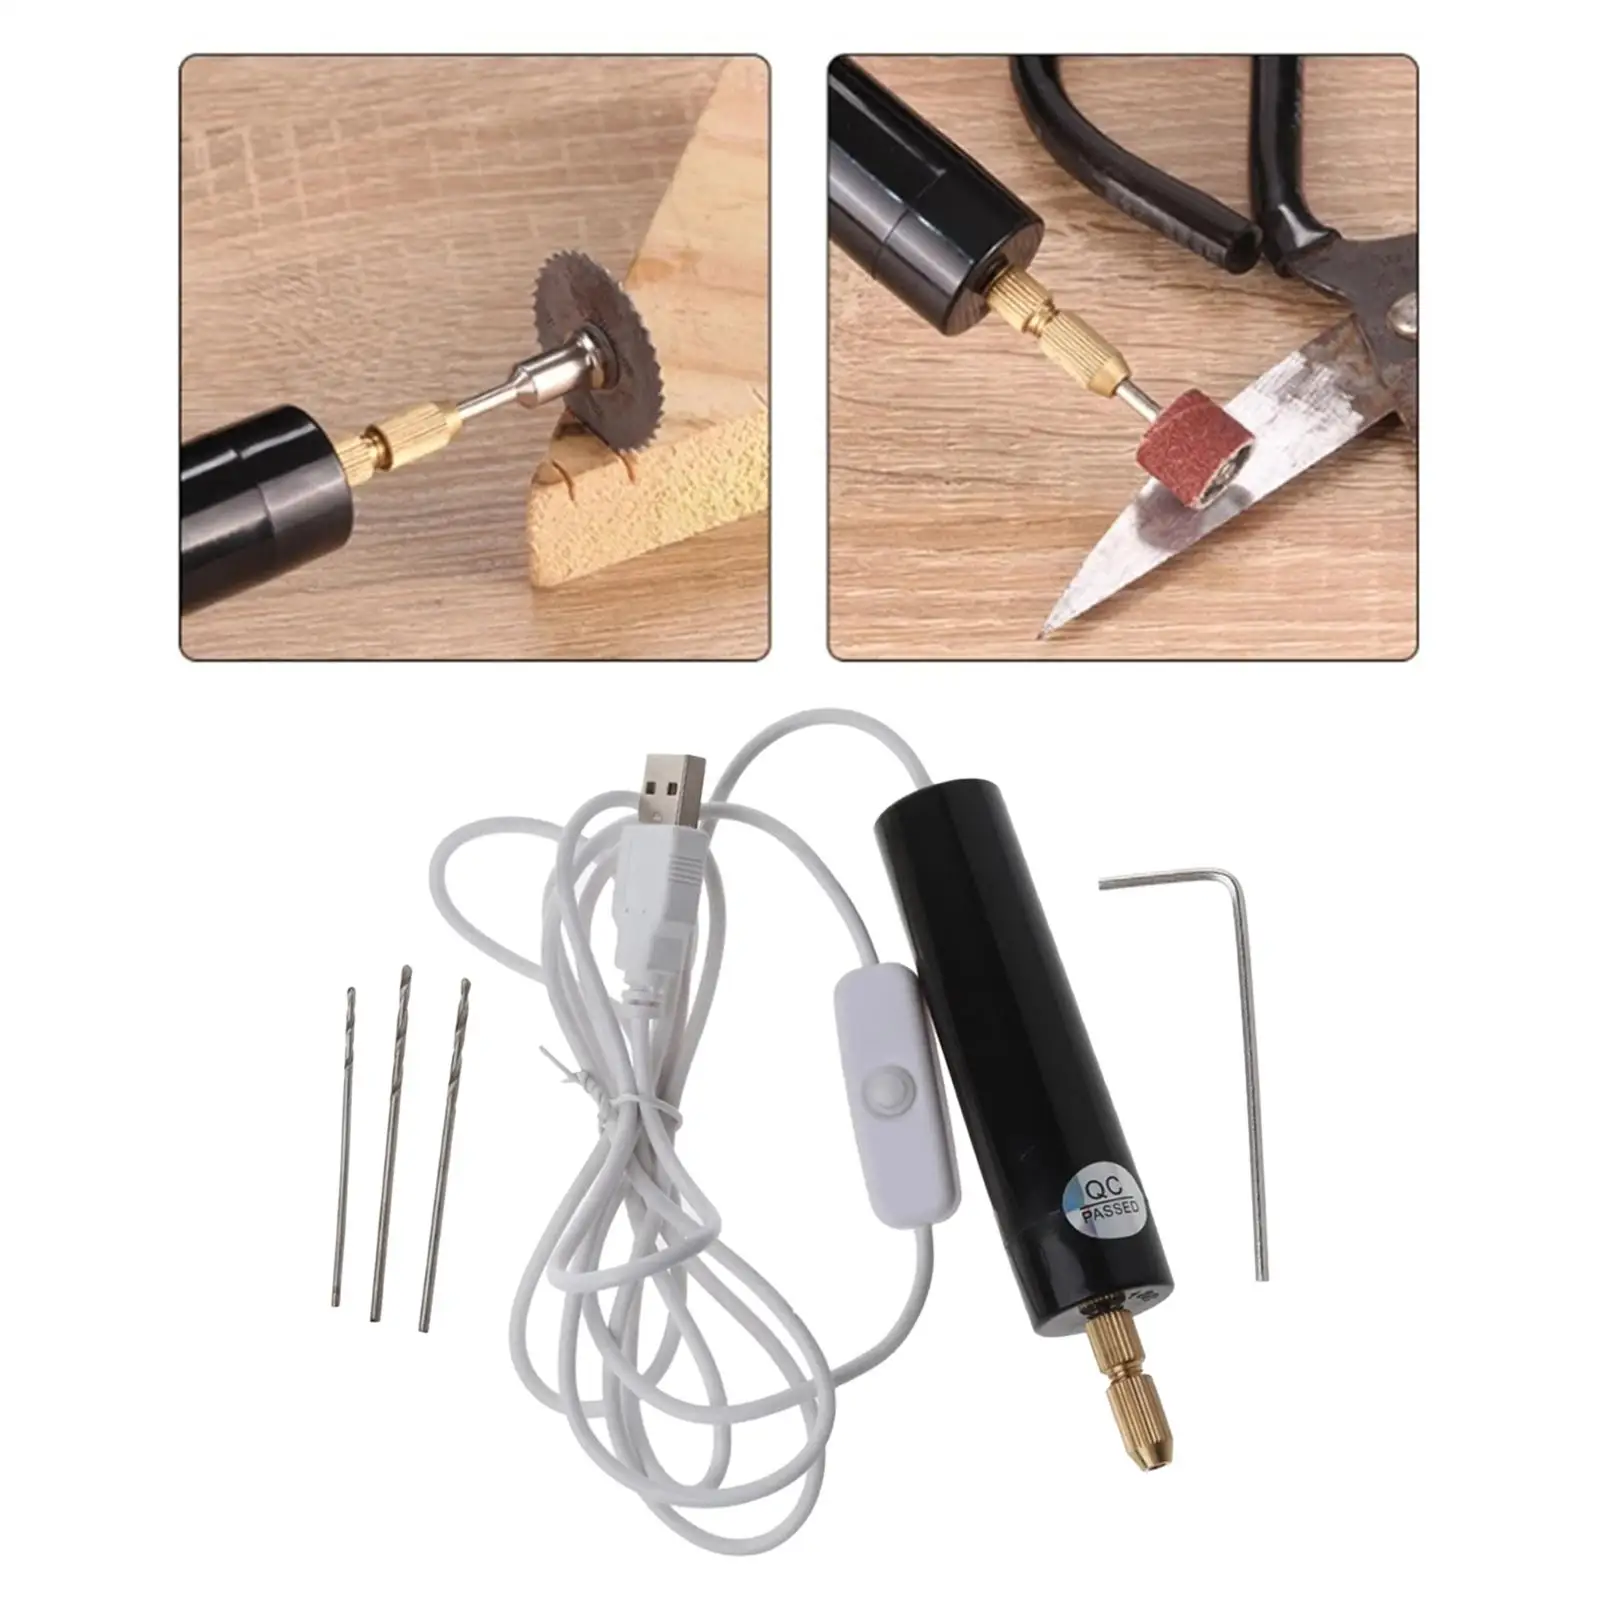 Mini Electric Drill Set for Resin Jewelry Making 0.8-1.2mm Handheld Drill